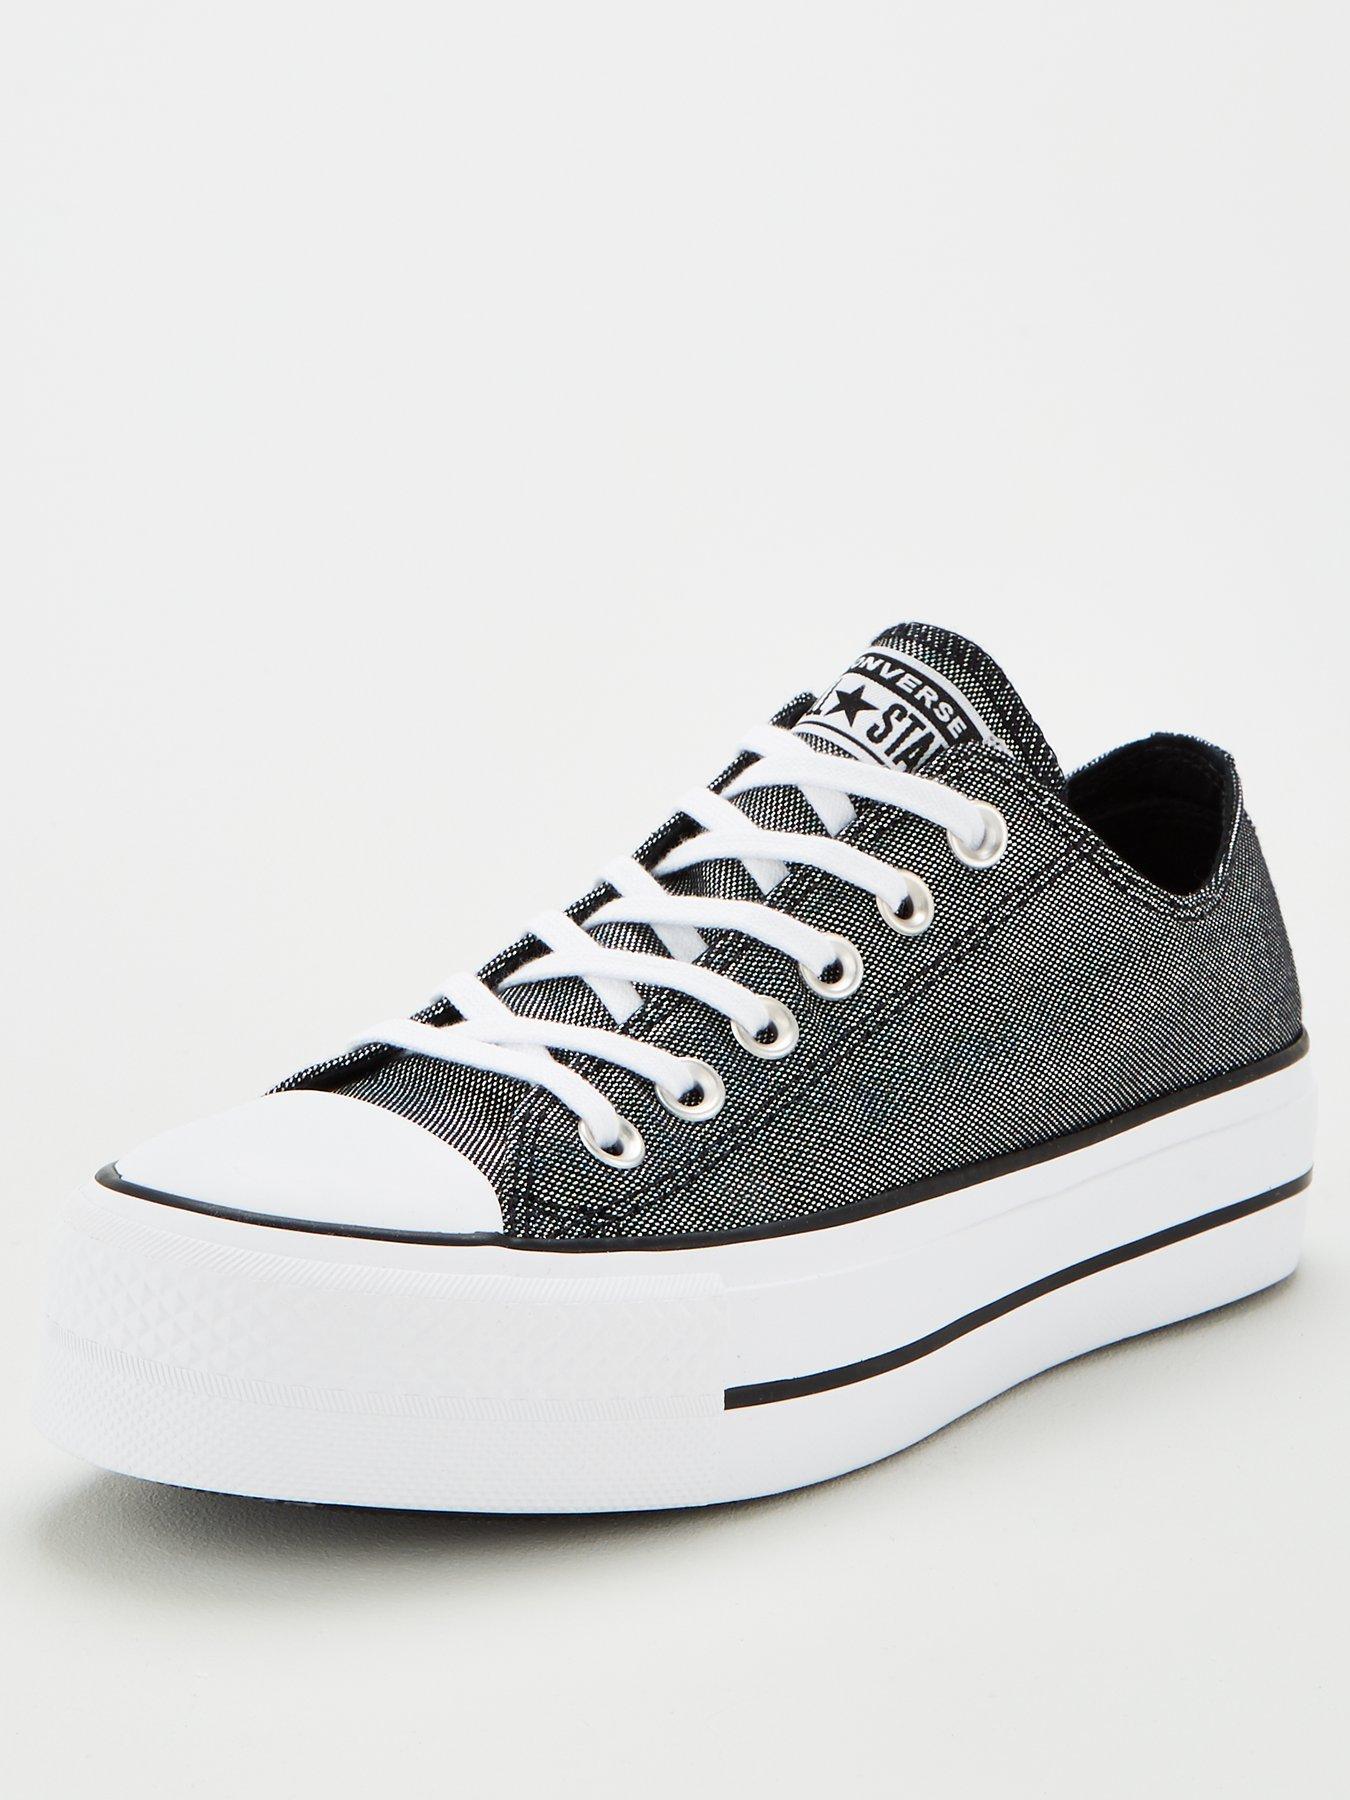 converse trainers womens sale